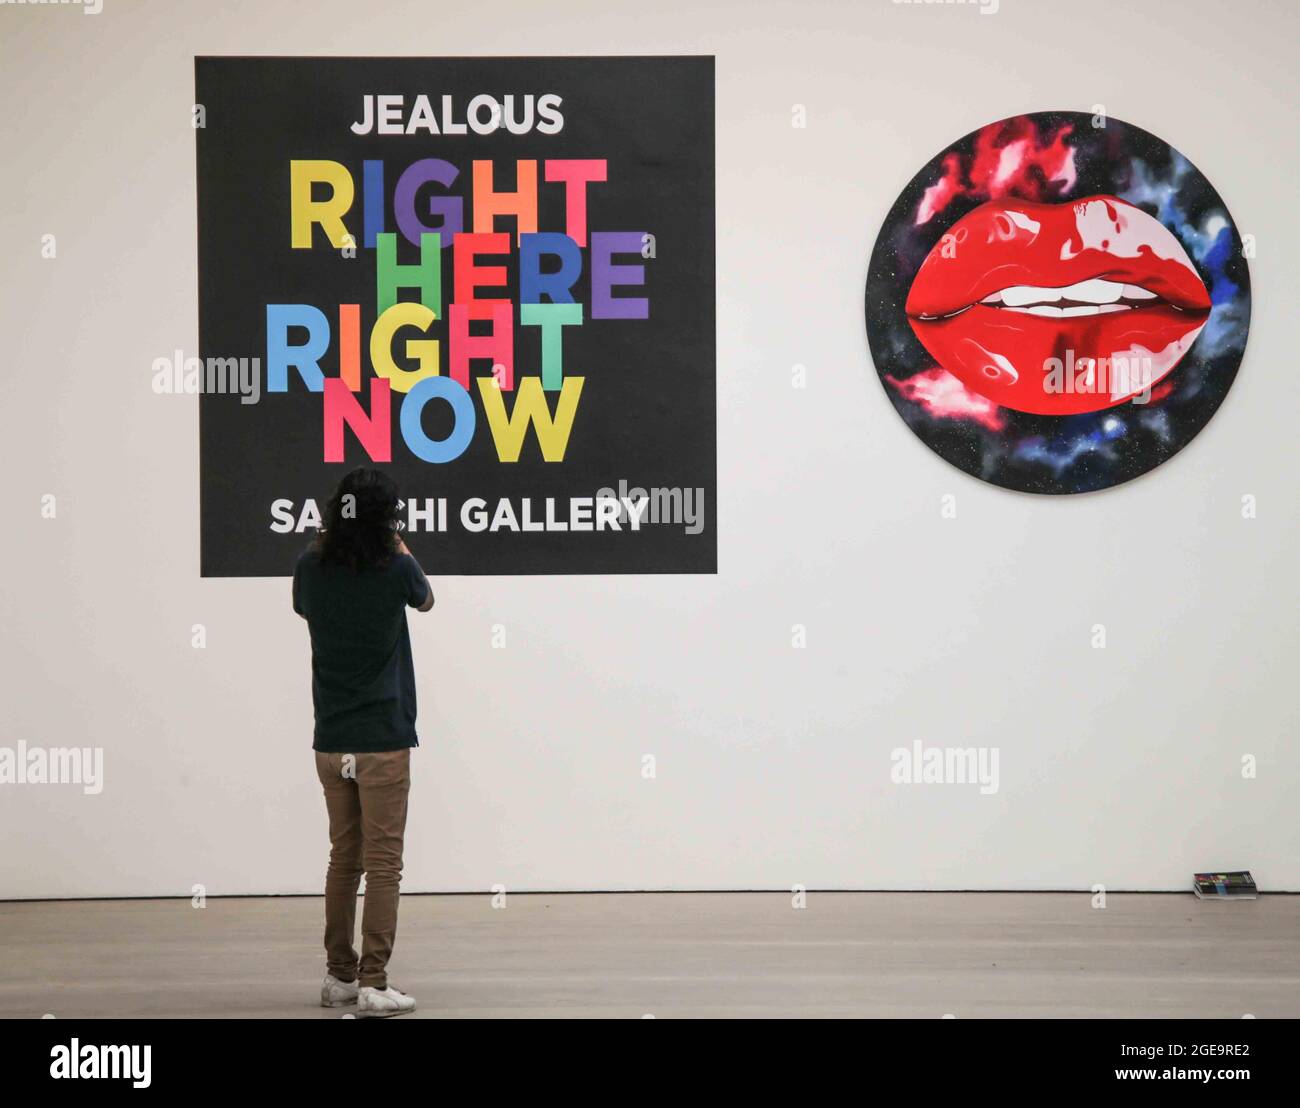 London UK 18 August 2021 RIGHT HERE RIGHT NOW. The 4,000 sq. ft exhibition will open in two gallery spaces at Saatchi Gallery on Thursday, 19 August 2021 until 9 September 2021.The exhibition features artworks by established artists such as Jake & Dinos Chapman, Charming Baker, David Shrigley and Chris Levine together with works by London based painter Matt Small and mural & installation artist Morag Myerscough. The show will also include previously unseen original work by Gary Stranger, Jessica Albarn, Eelus, Sara Pope and an exciting new collaboration between Andrew Millar & Word To Mother.P Stock Photo